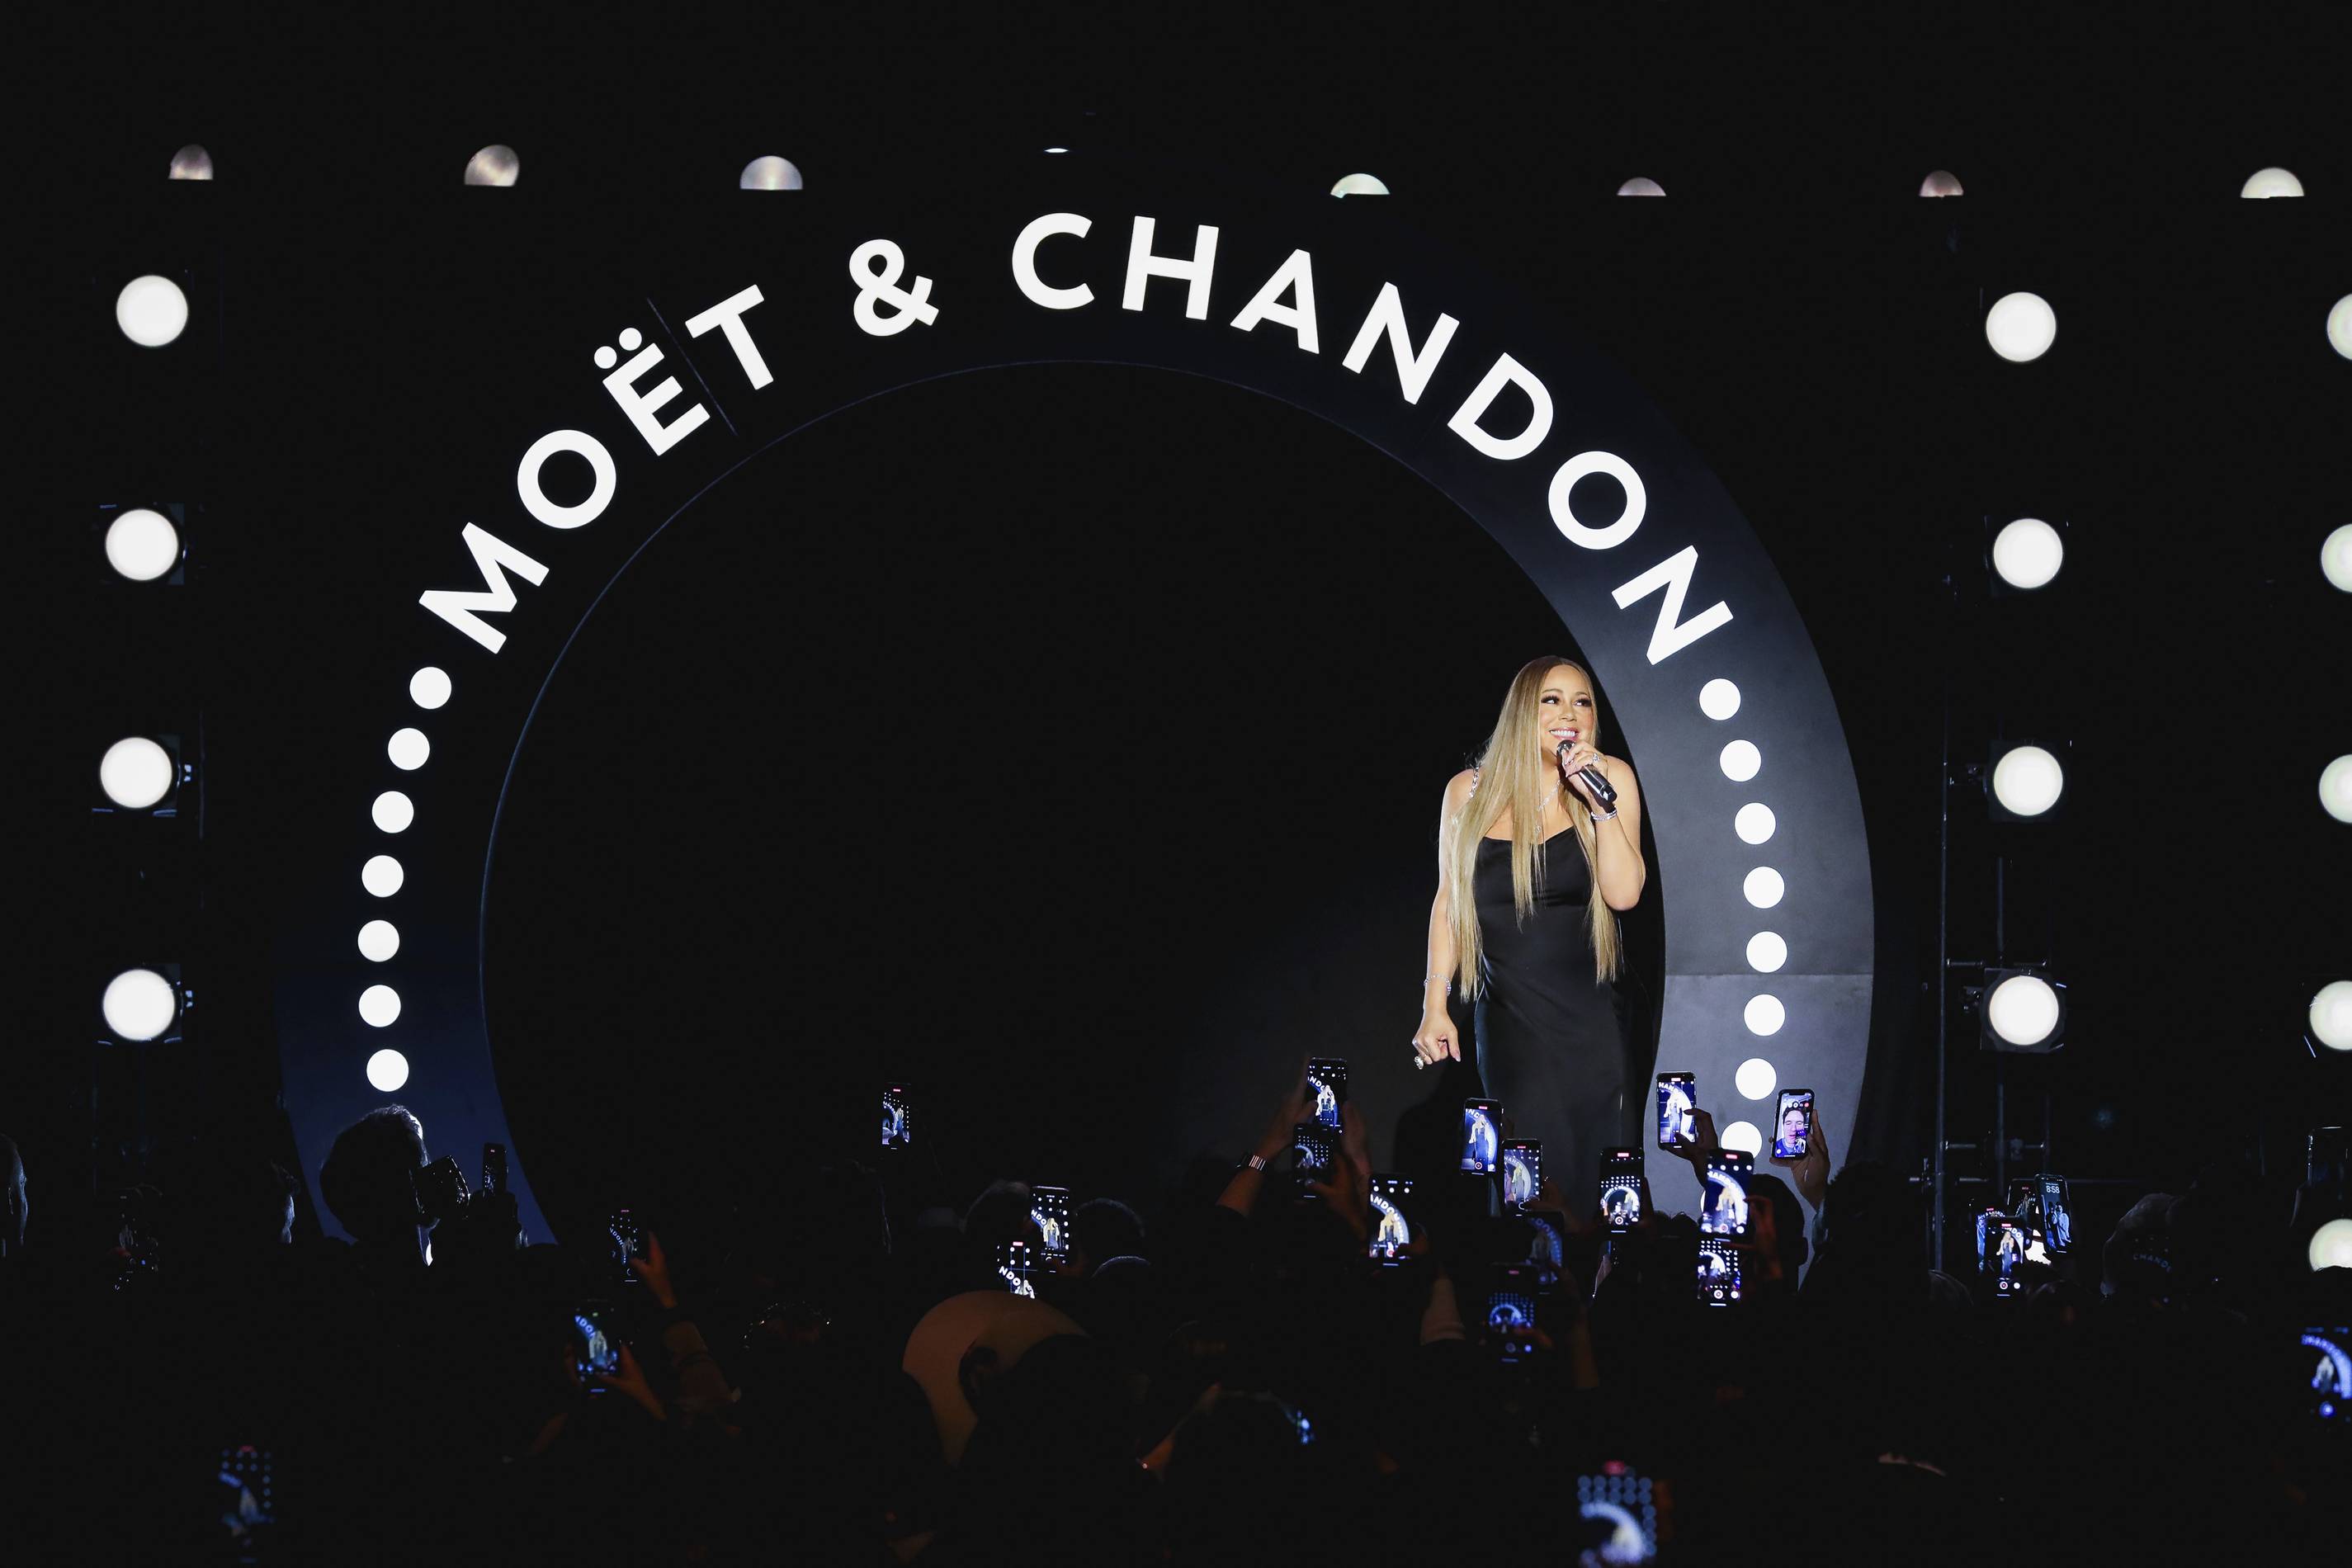 Mariah Carey performs "All I Want For Christmas Is You" at the Moet et Chandon end of year party in 2022